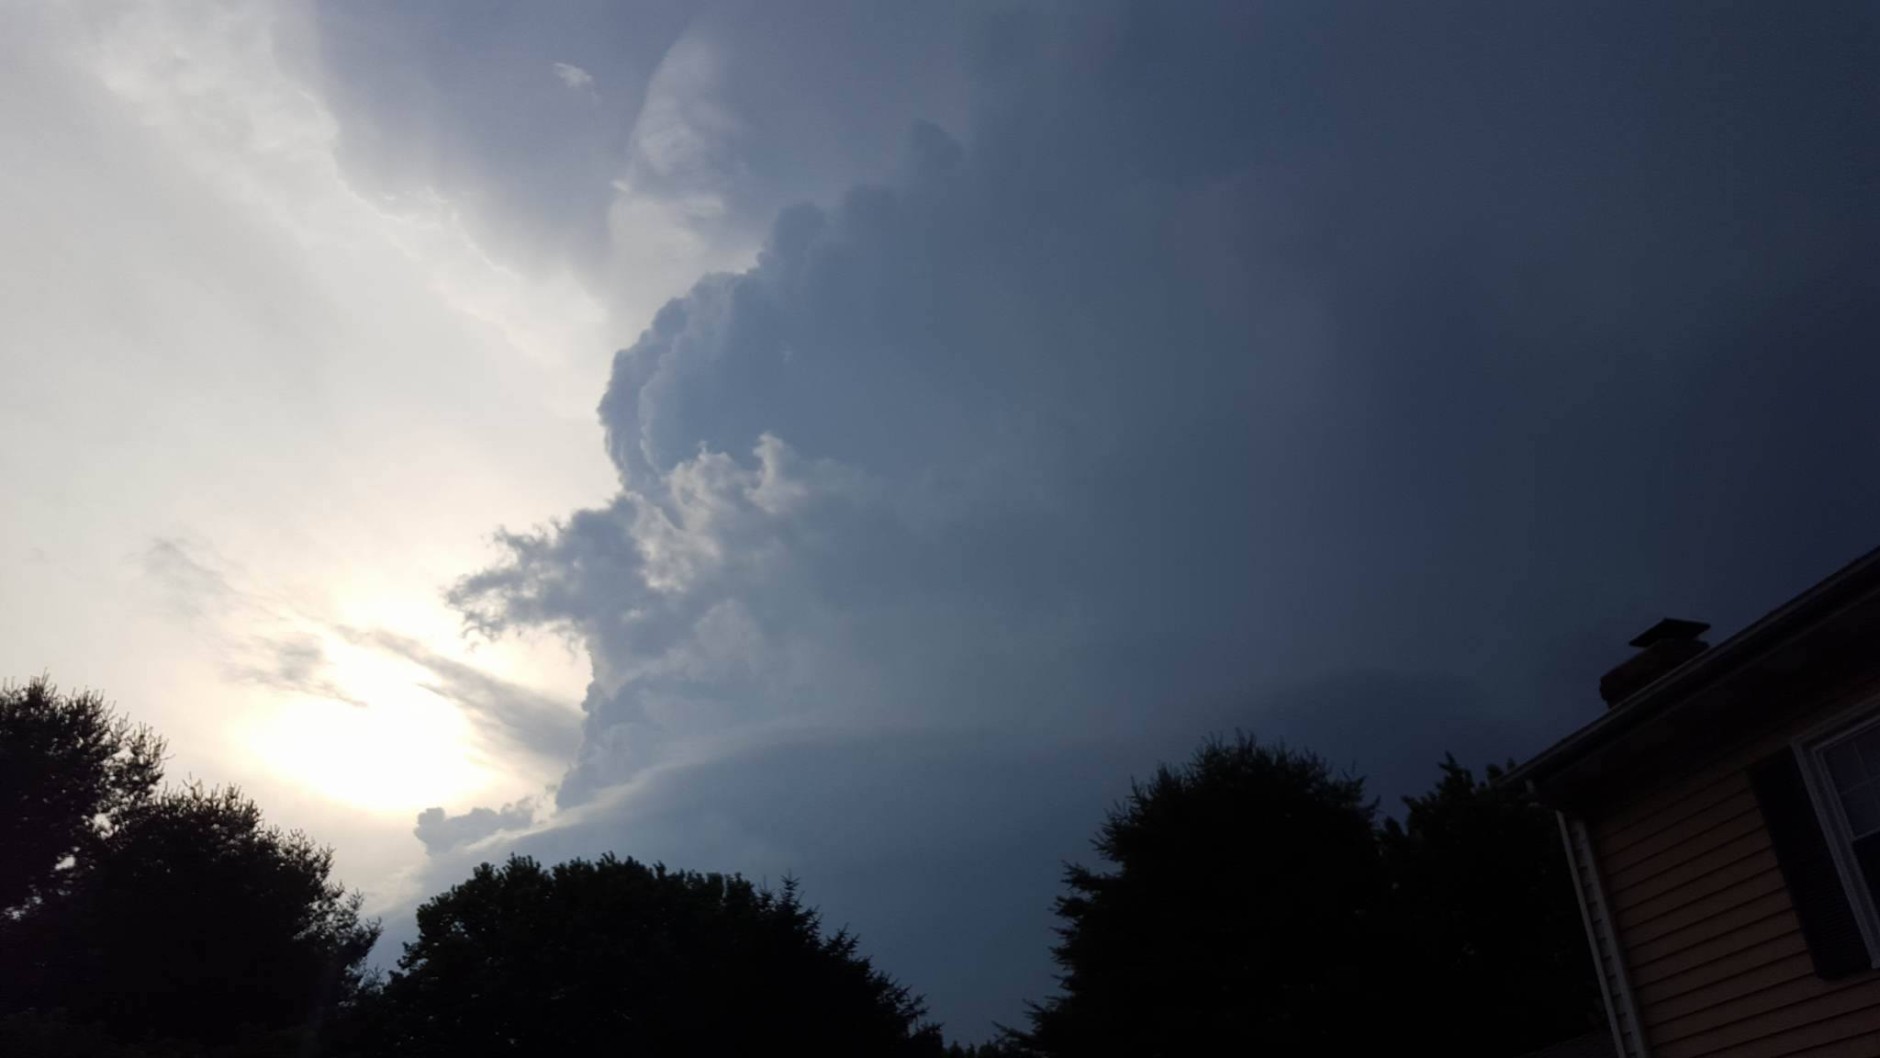 Storm clouds in Middleburg, Virginia on June 16, 2016. (Courtesy Suzi Tzaferis)